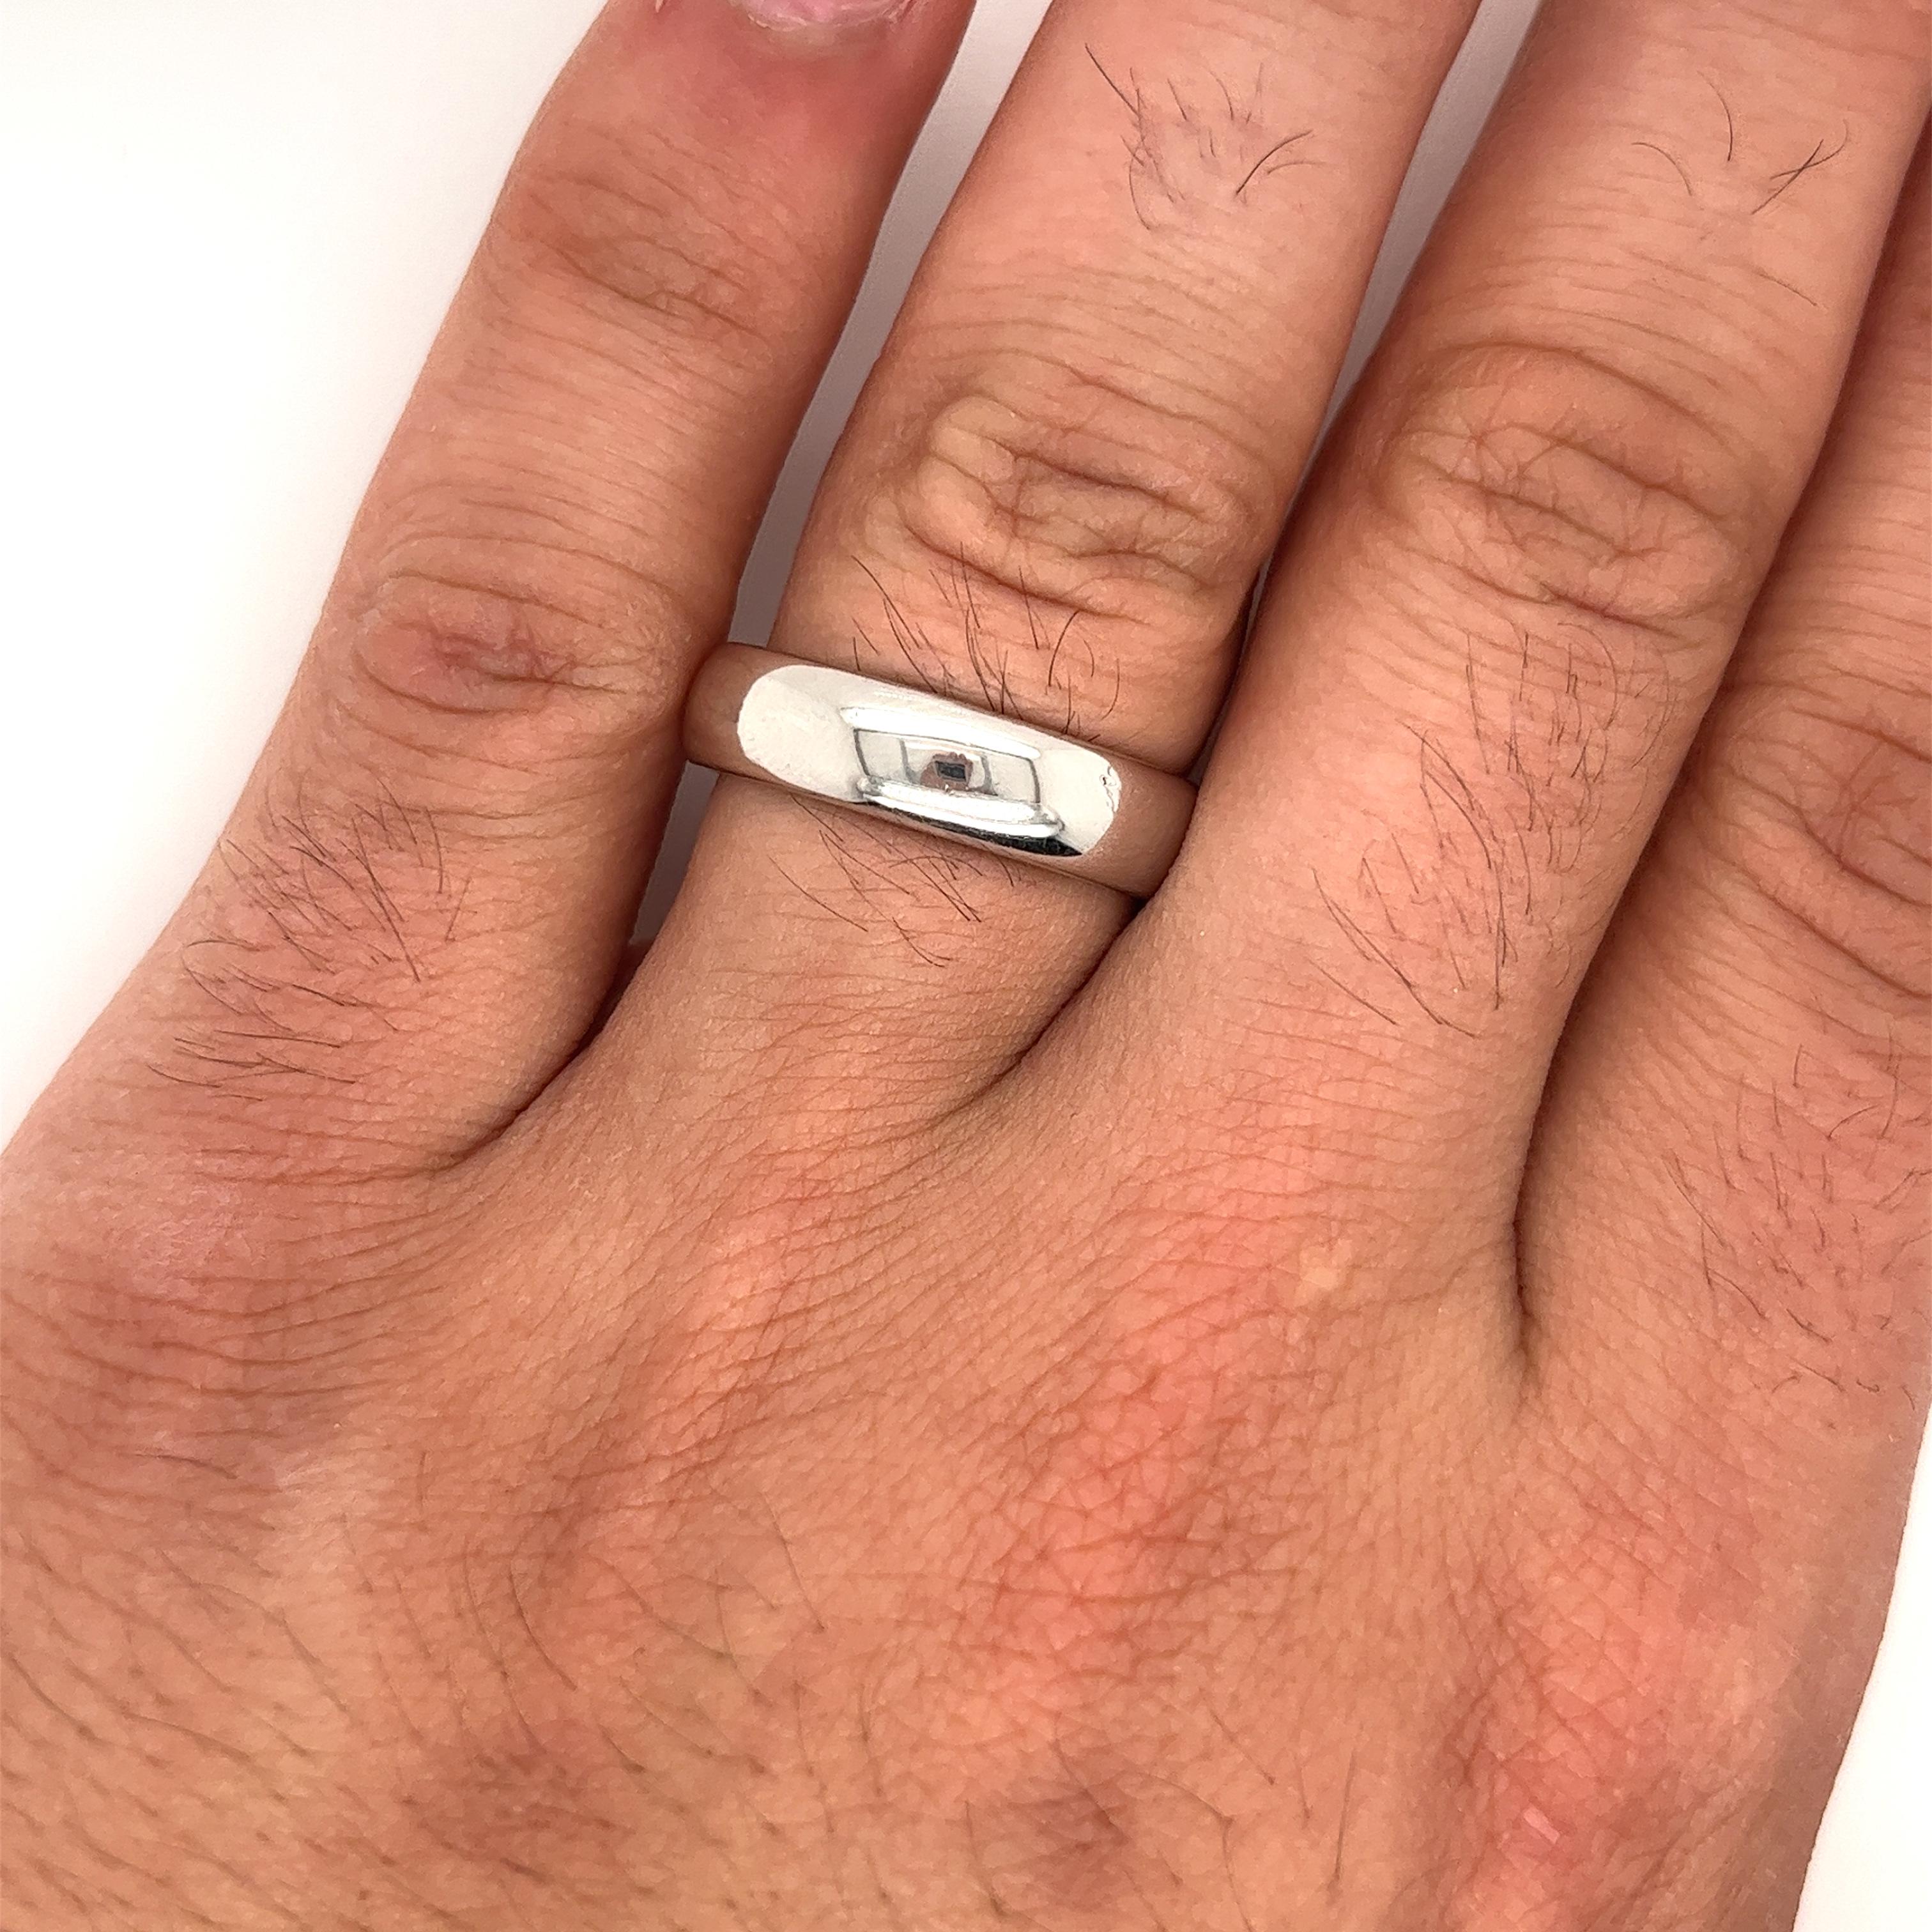 Tiffany & Co. signed men's wedding band, expertly crafted in platinum 950. This distinguished 6mm wide ring is designed for the modern gentleman, providing a refined and sophisticated touch to any ensemble. With a ring size of 11, this Tiffany & Co.